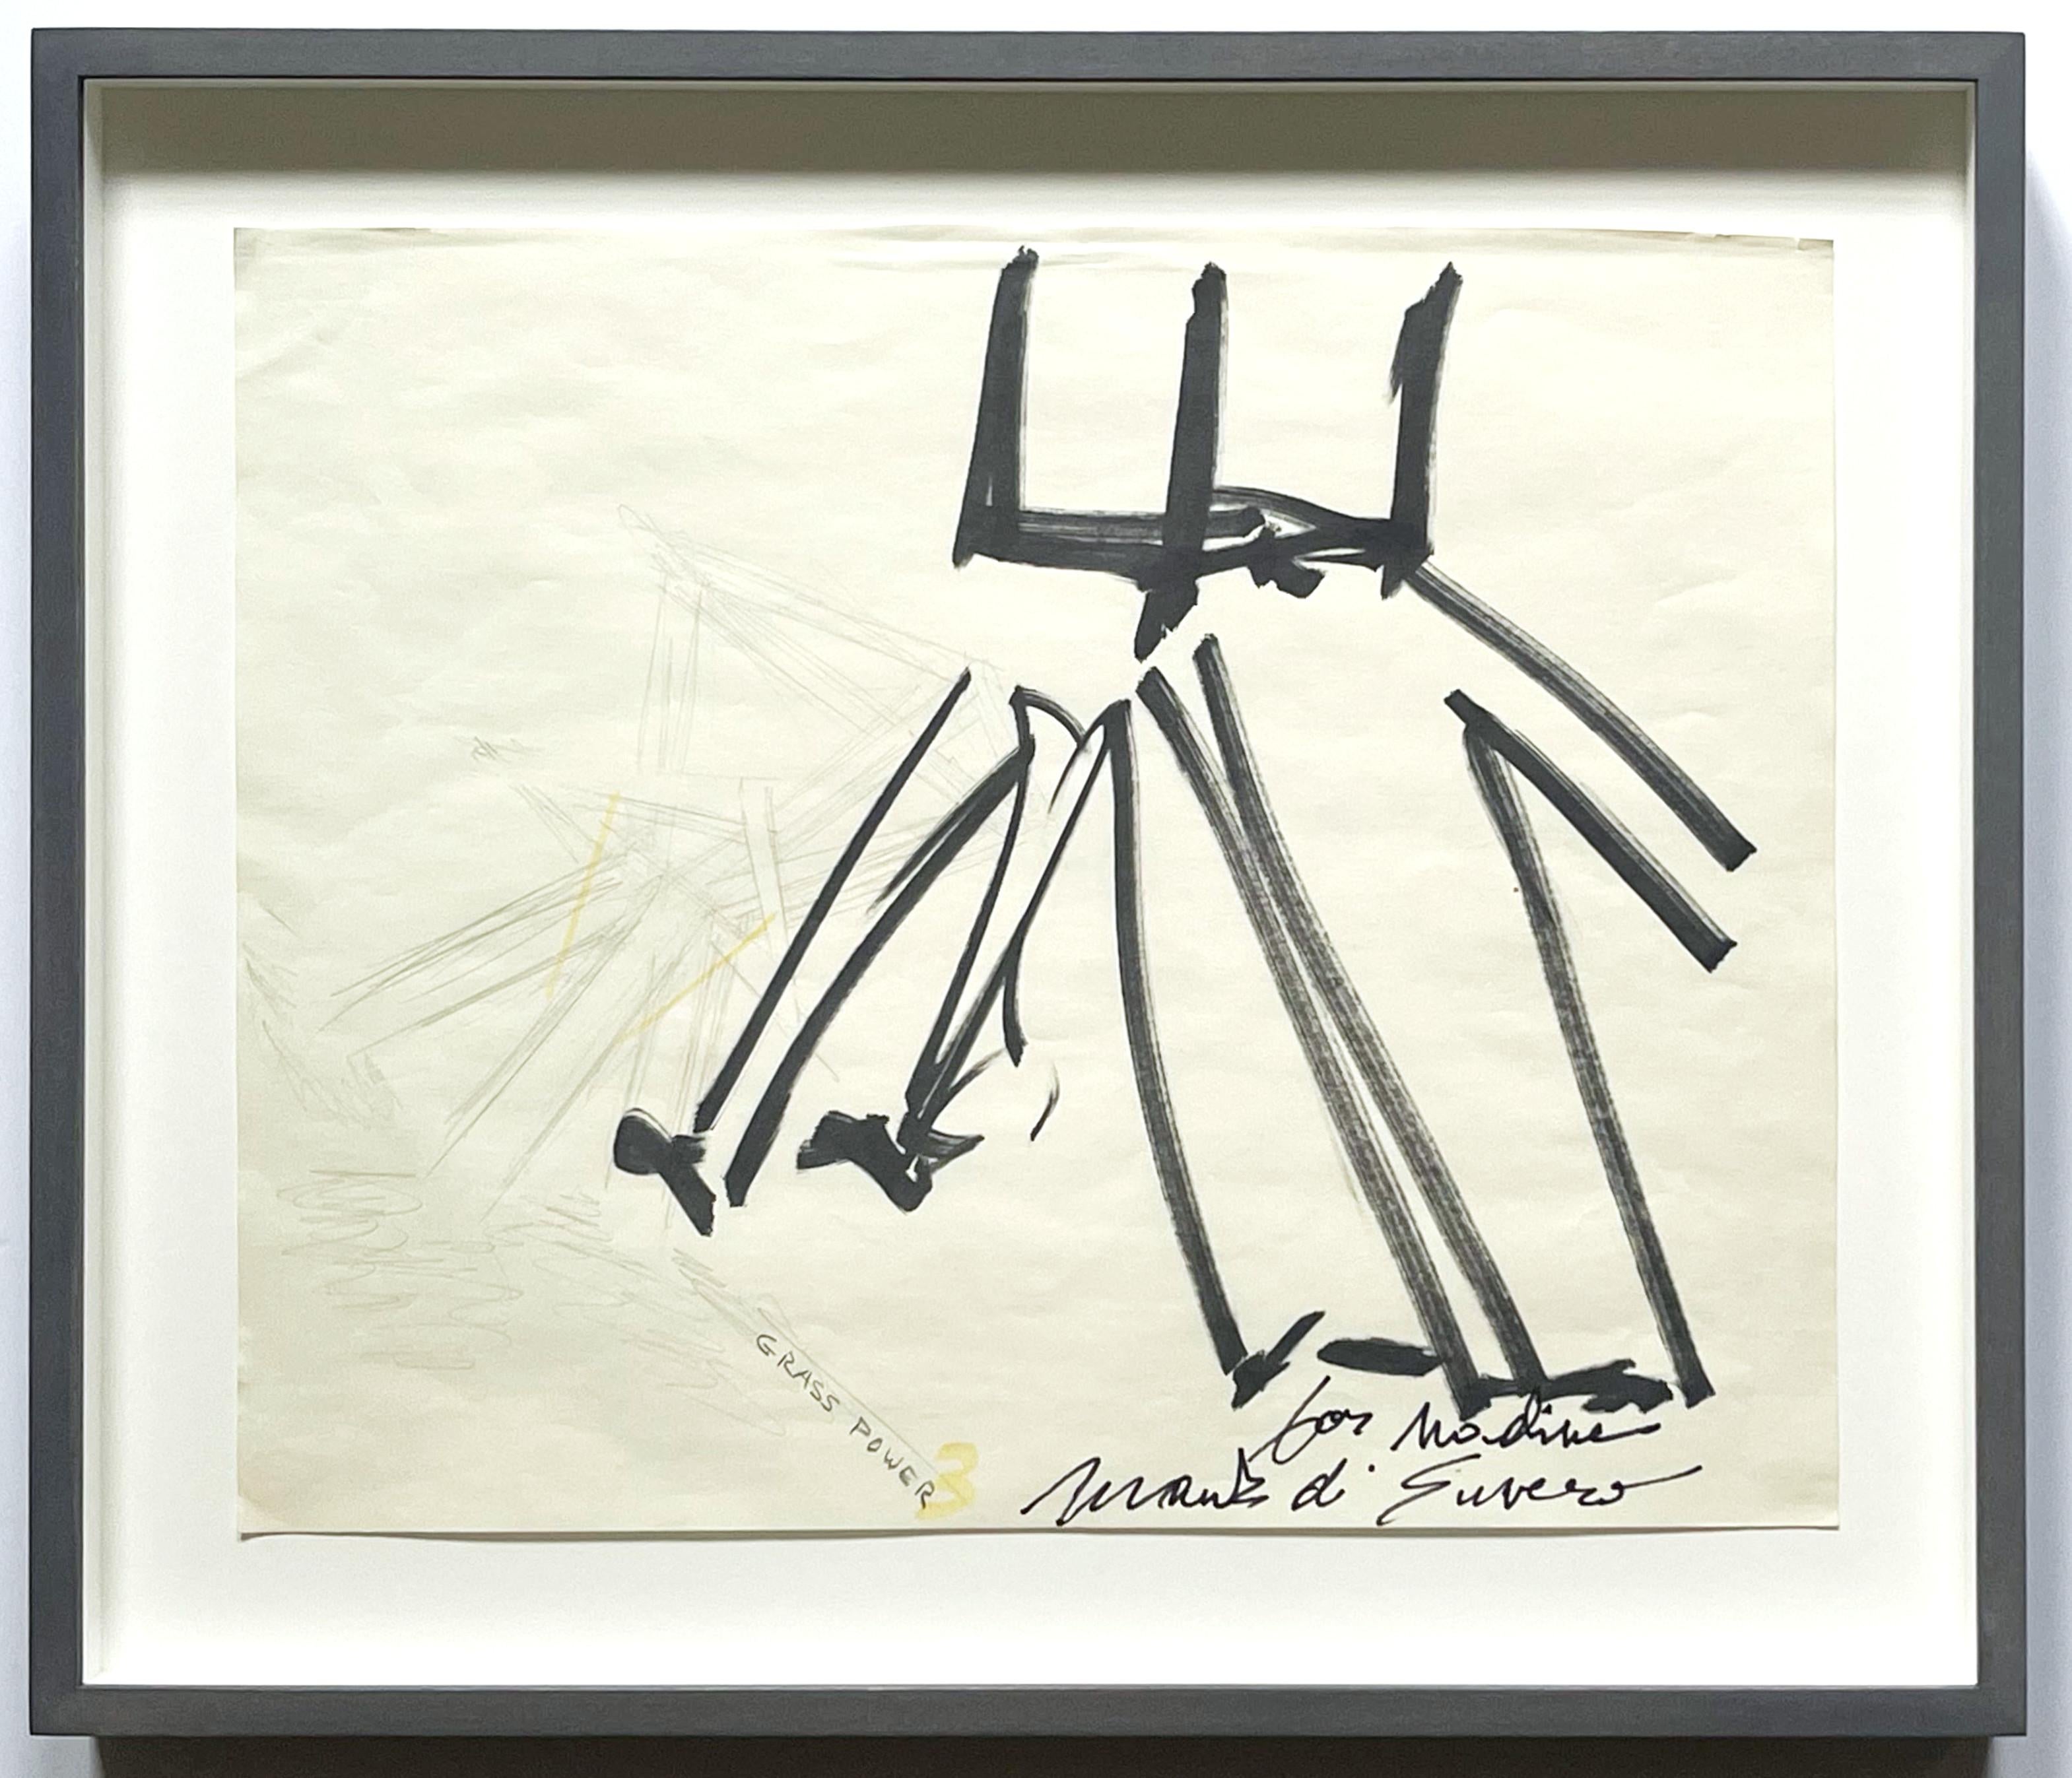 Grass Power, original unique signed drawing, hand signed and inscribed; Framed - Mixed Media Art by Mark di Suvero